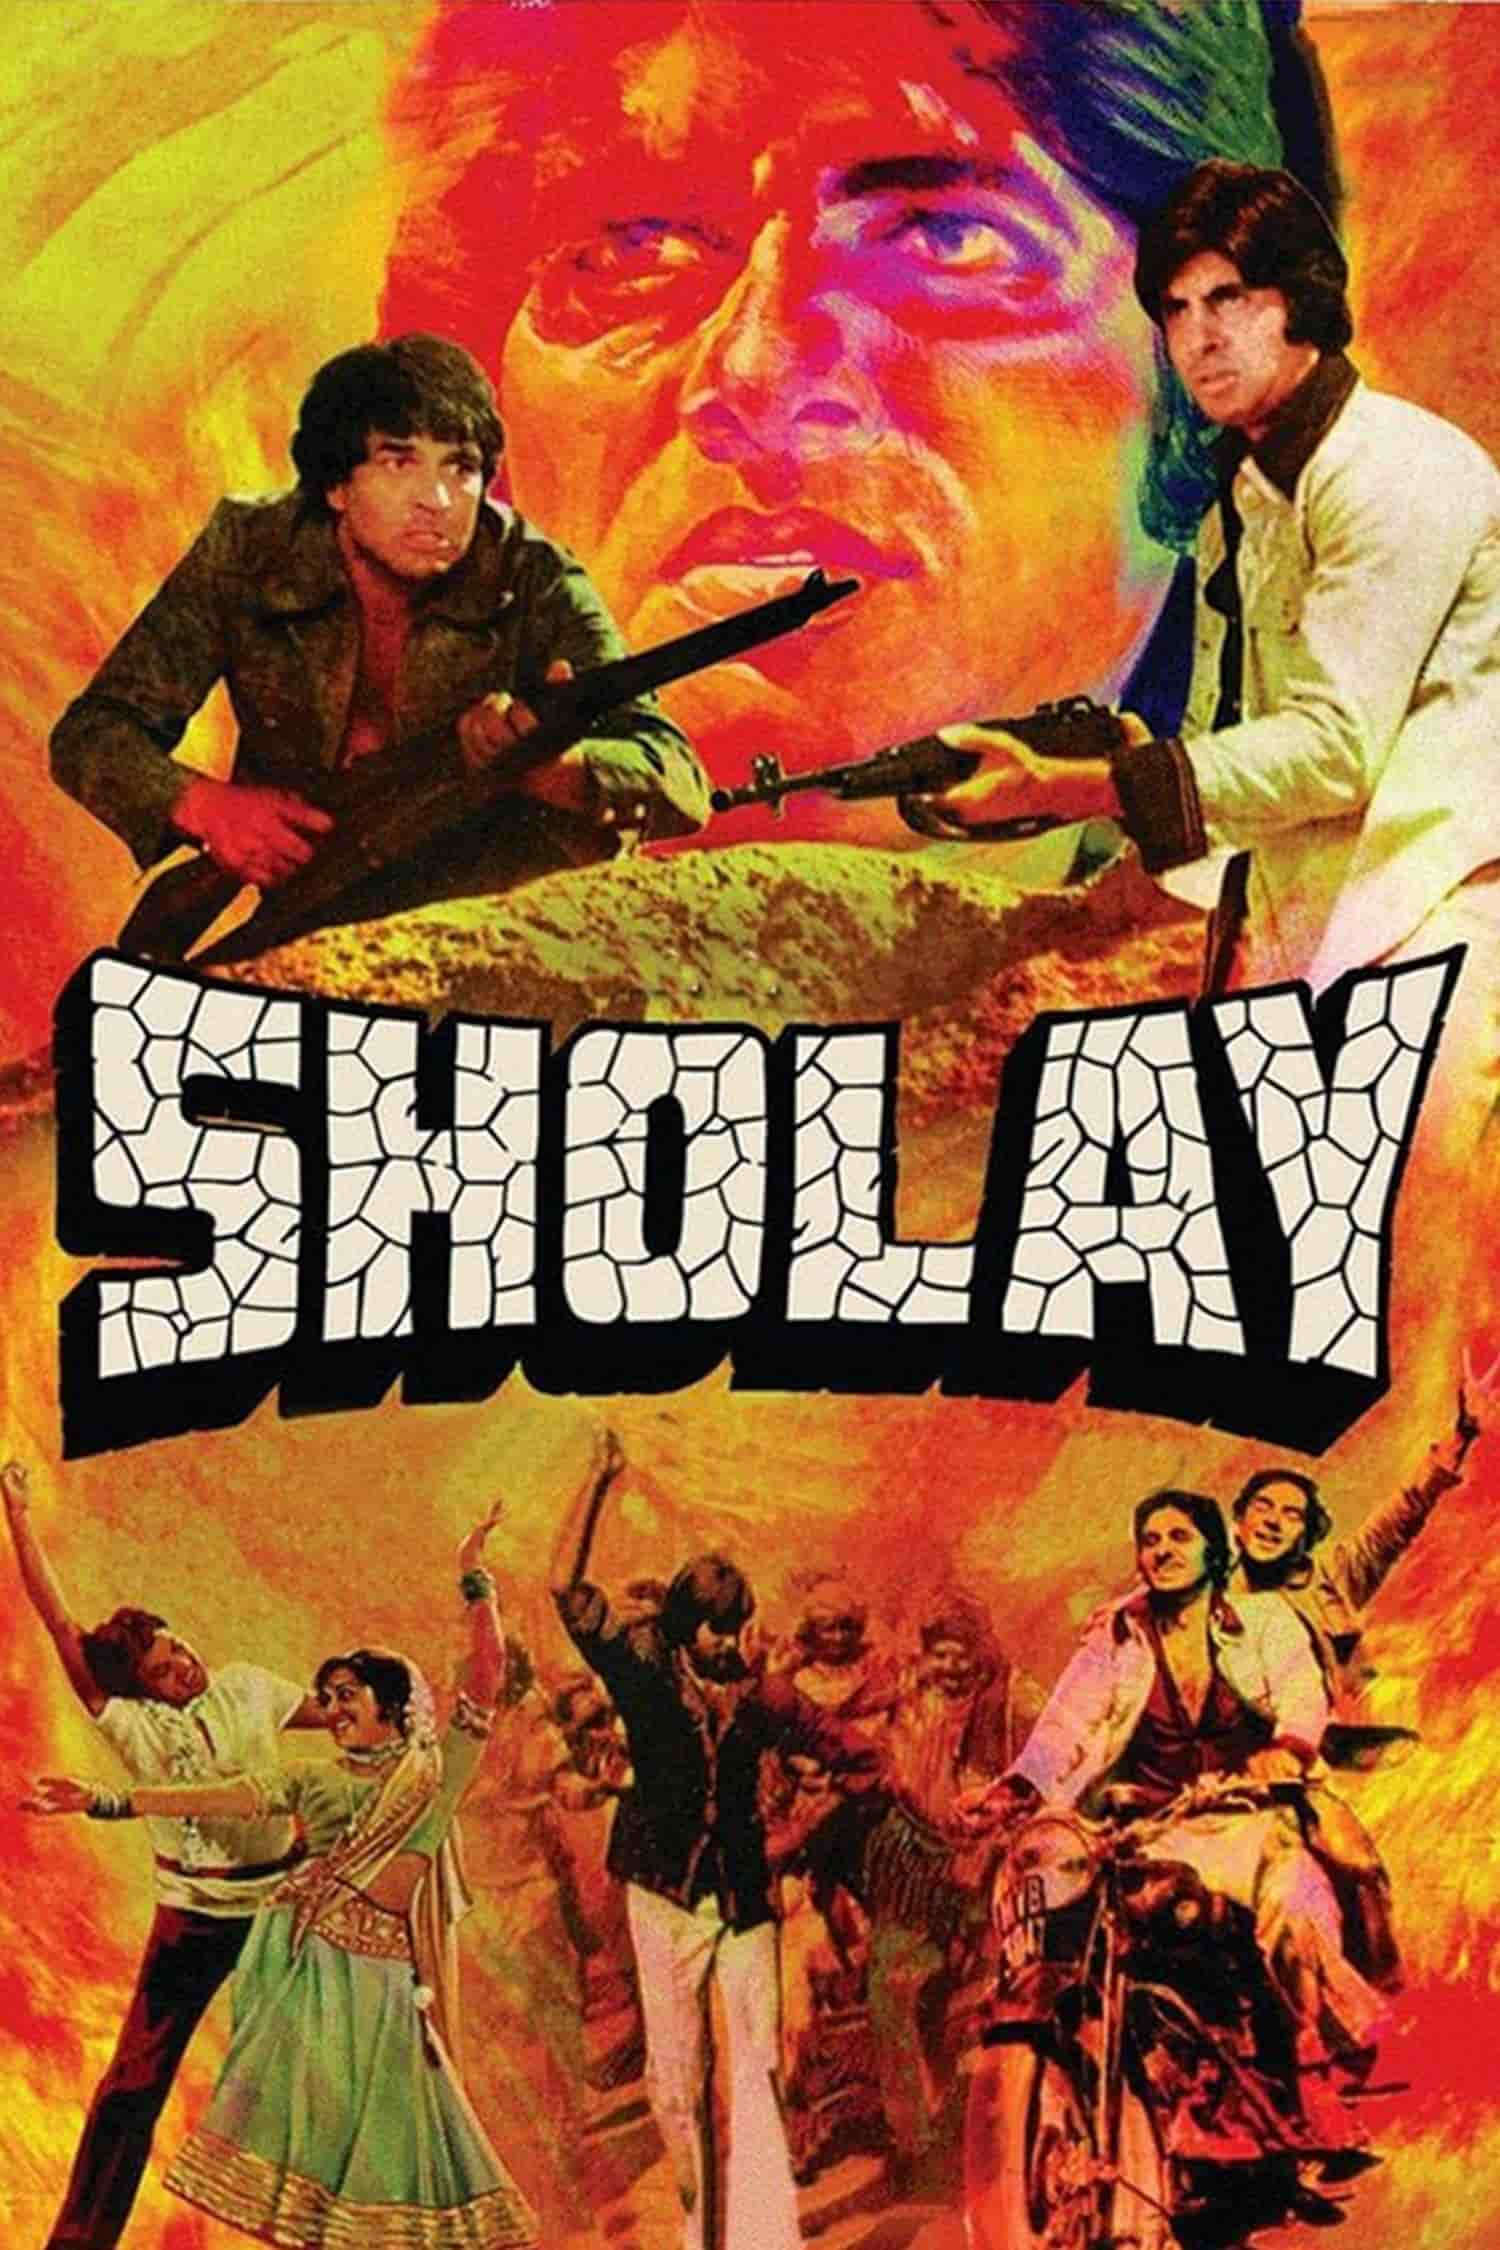 Must Watch Bollywood Movie: Sholay